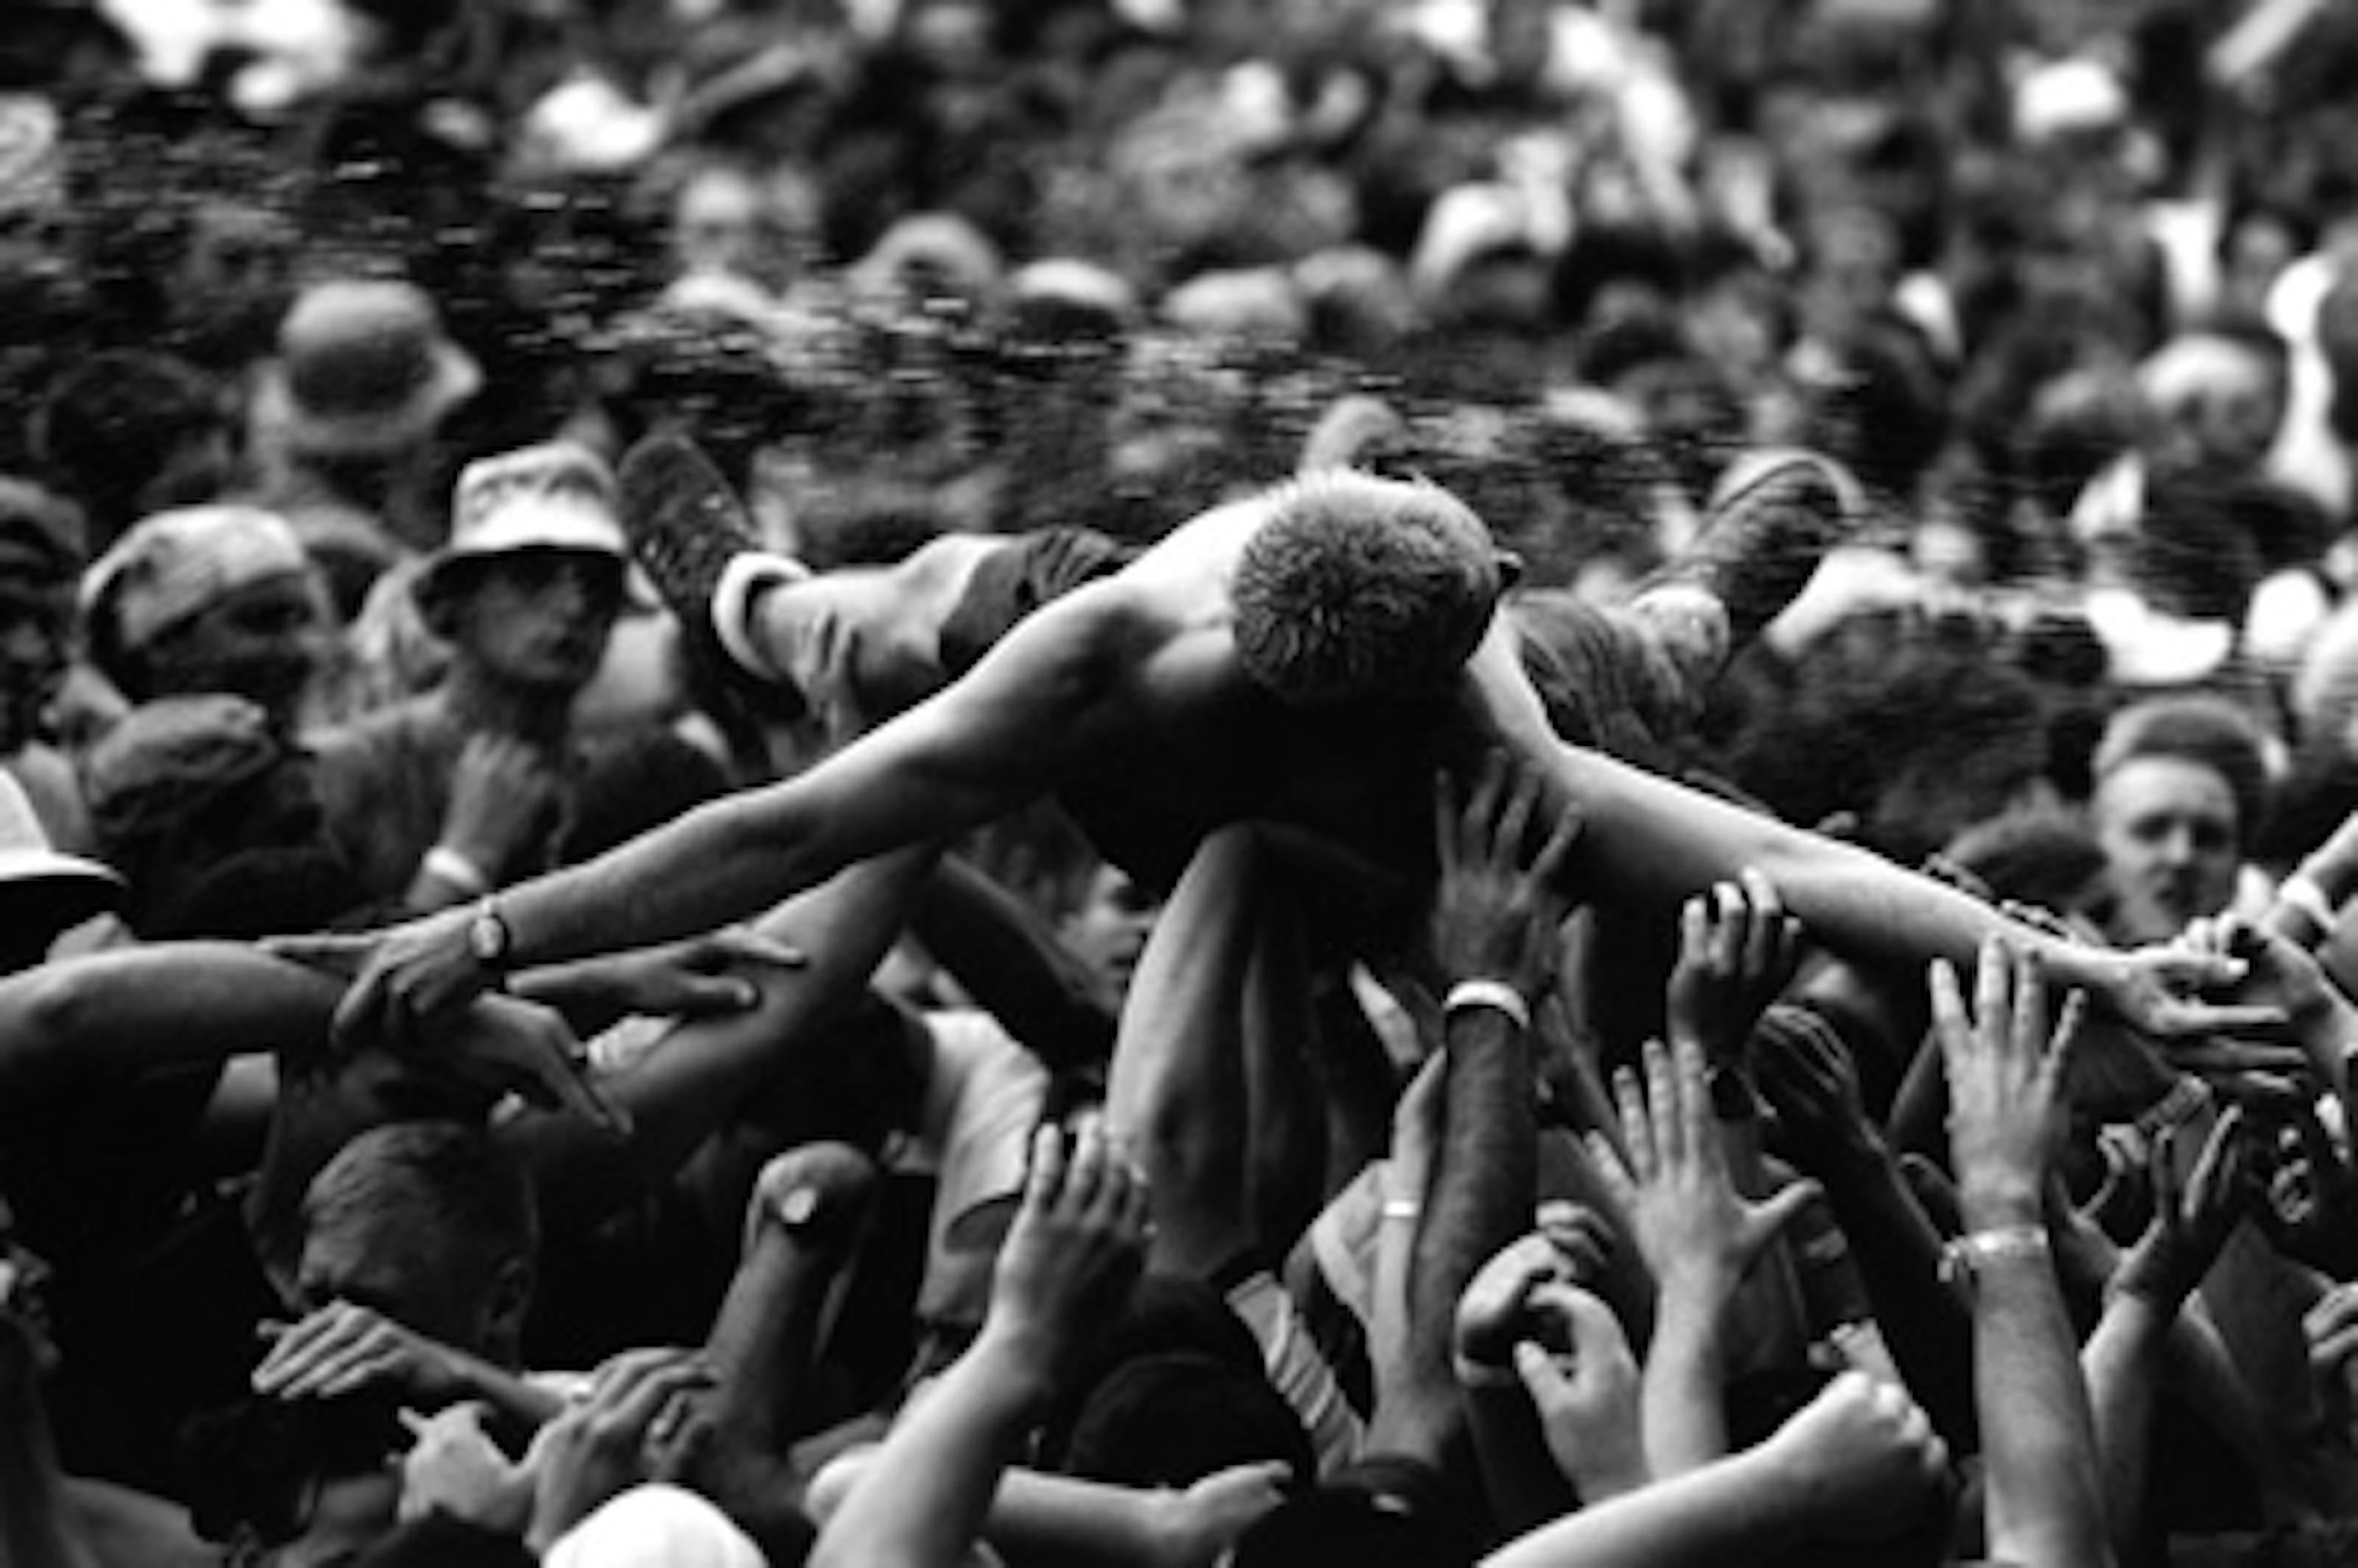 Mike Schreiber Black and White Photograph - Woodstock 99